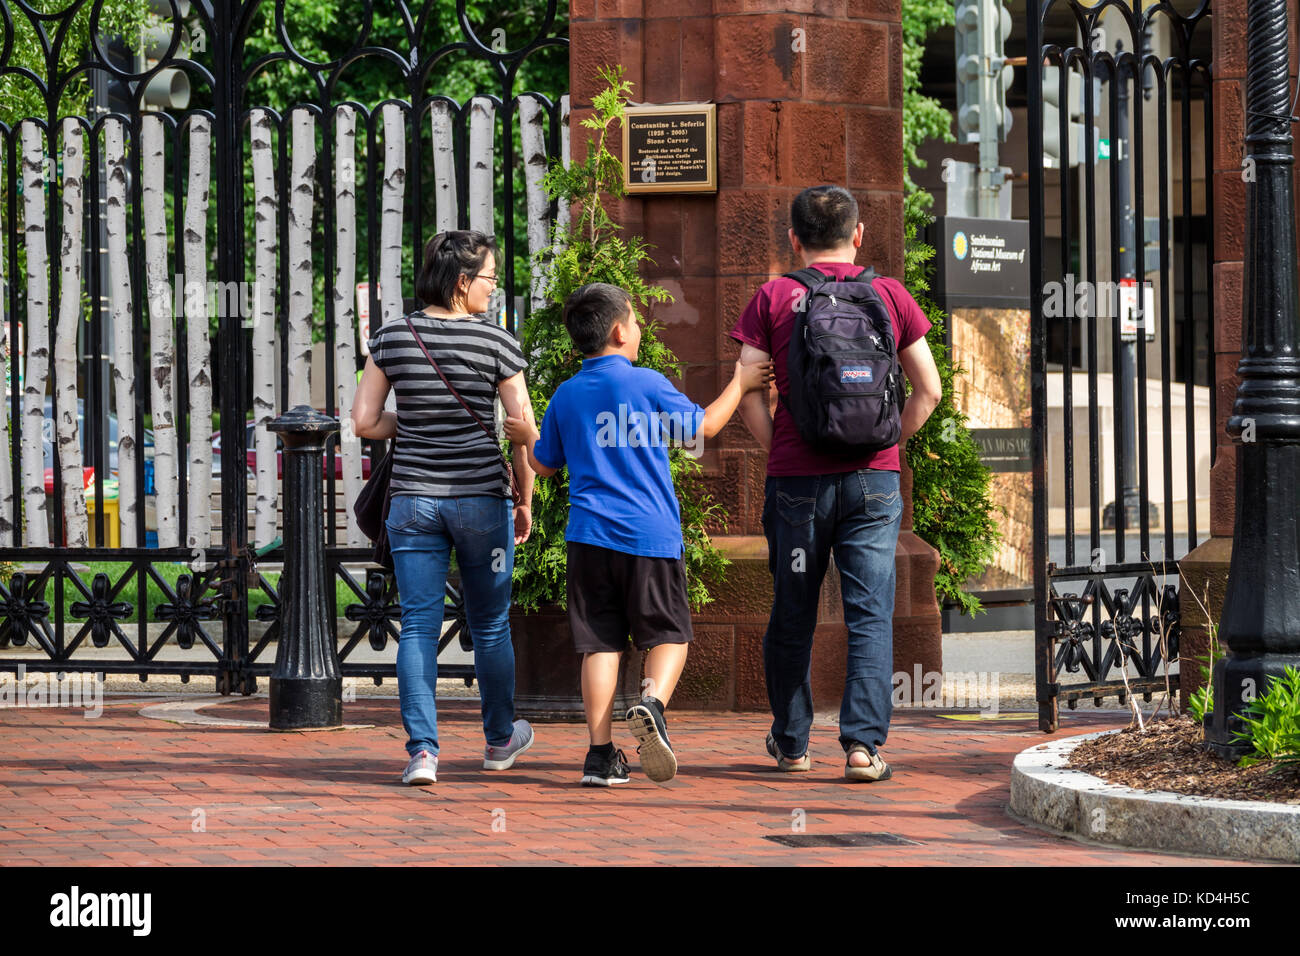 Washington DC,District of Columbia,National Mall,Enid A. Haupt Garden,gate,Asian Asians ethnic immigrant immigrants minority,adult adults man men male Stock Photo